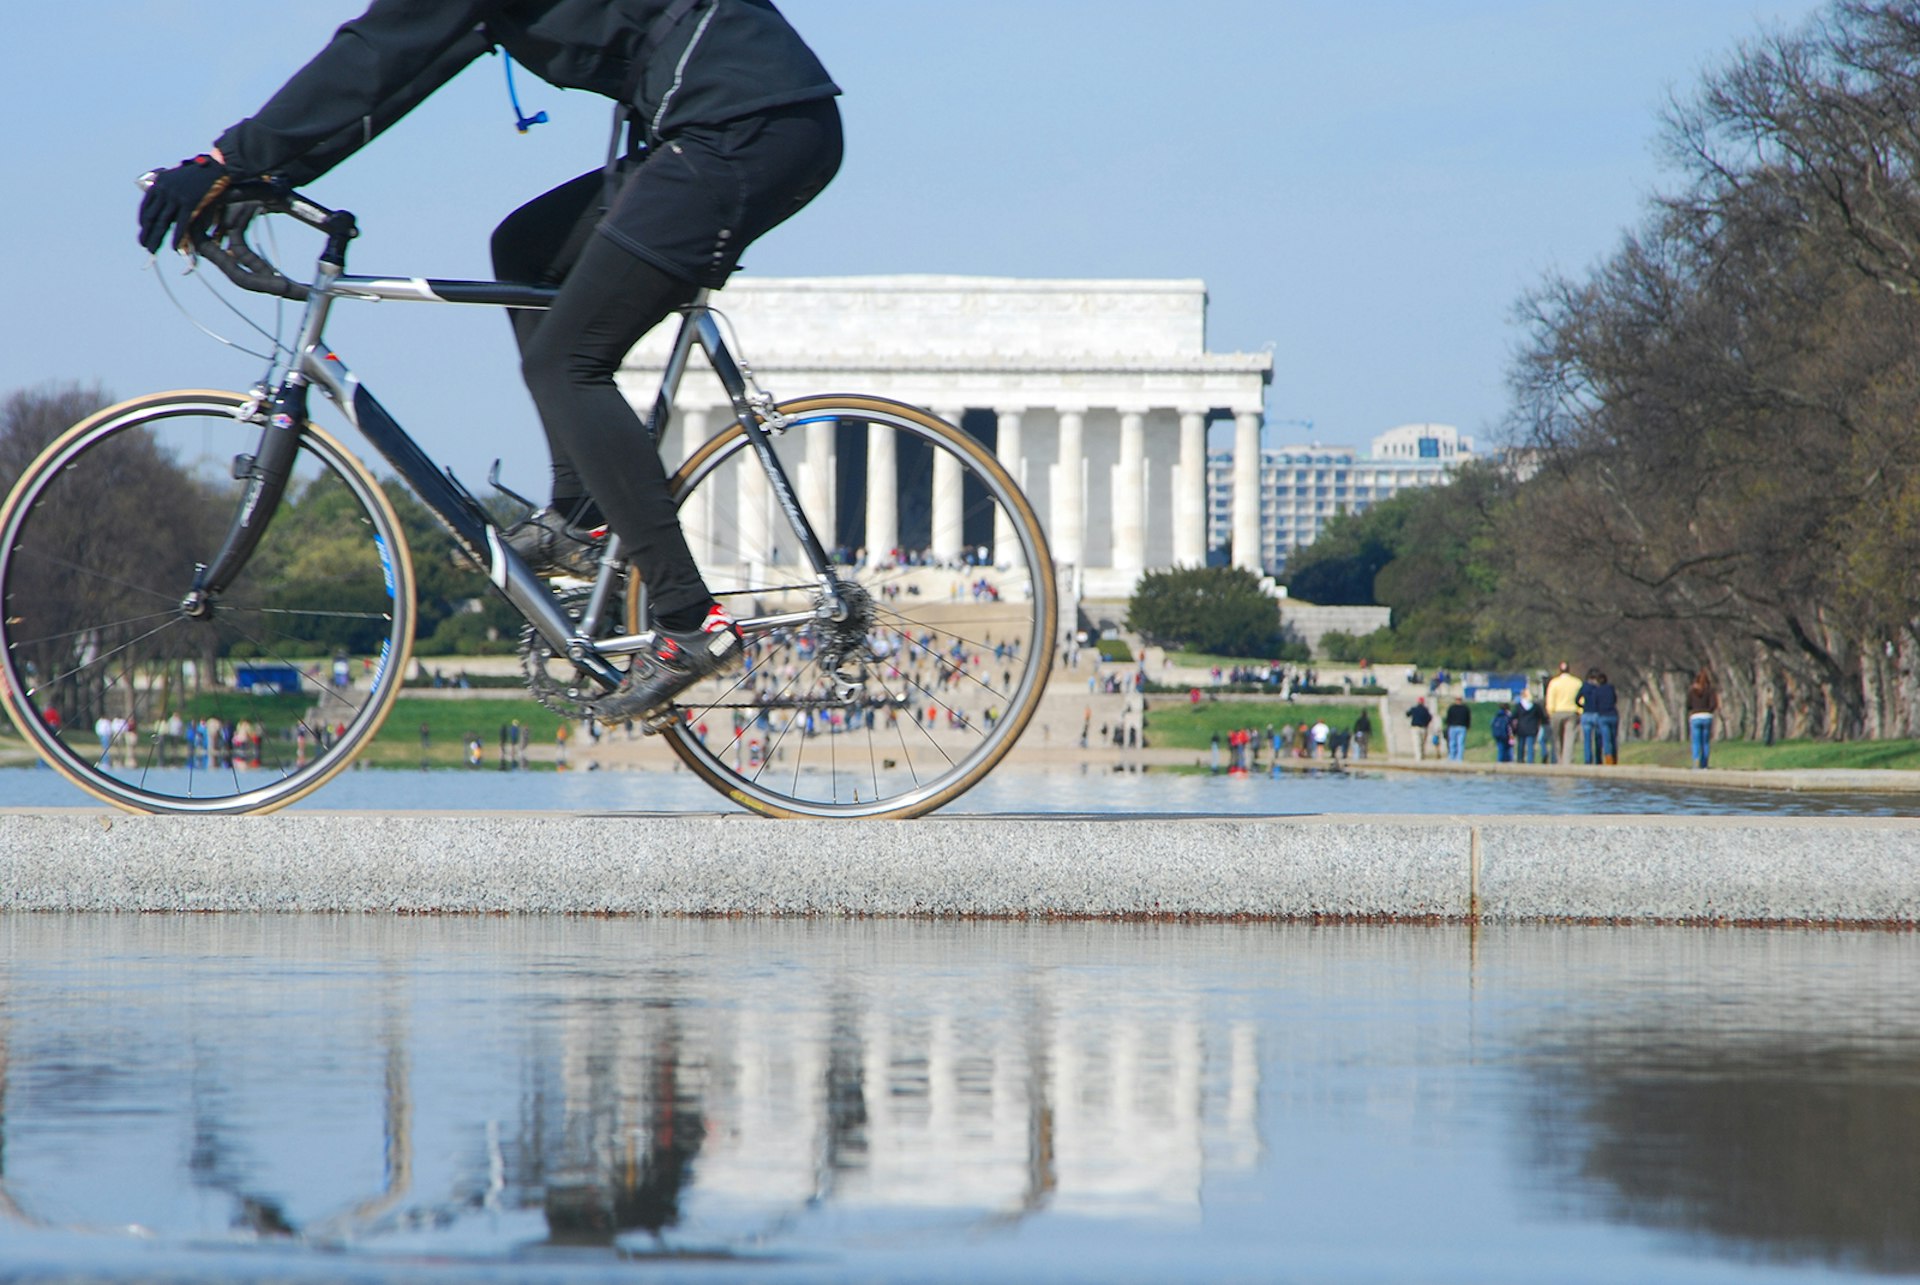 Features - Biker and Lincoln Memorial in reflection